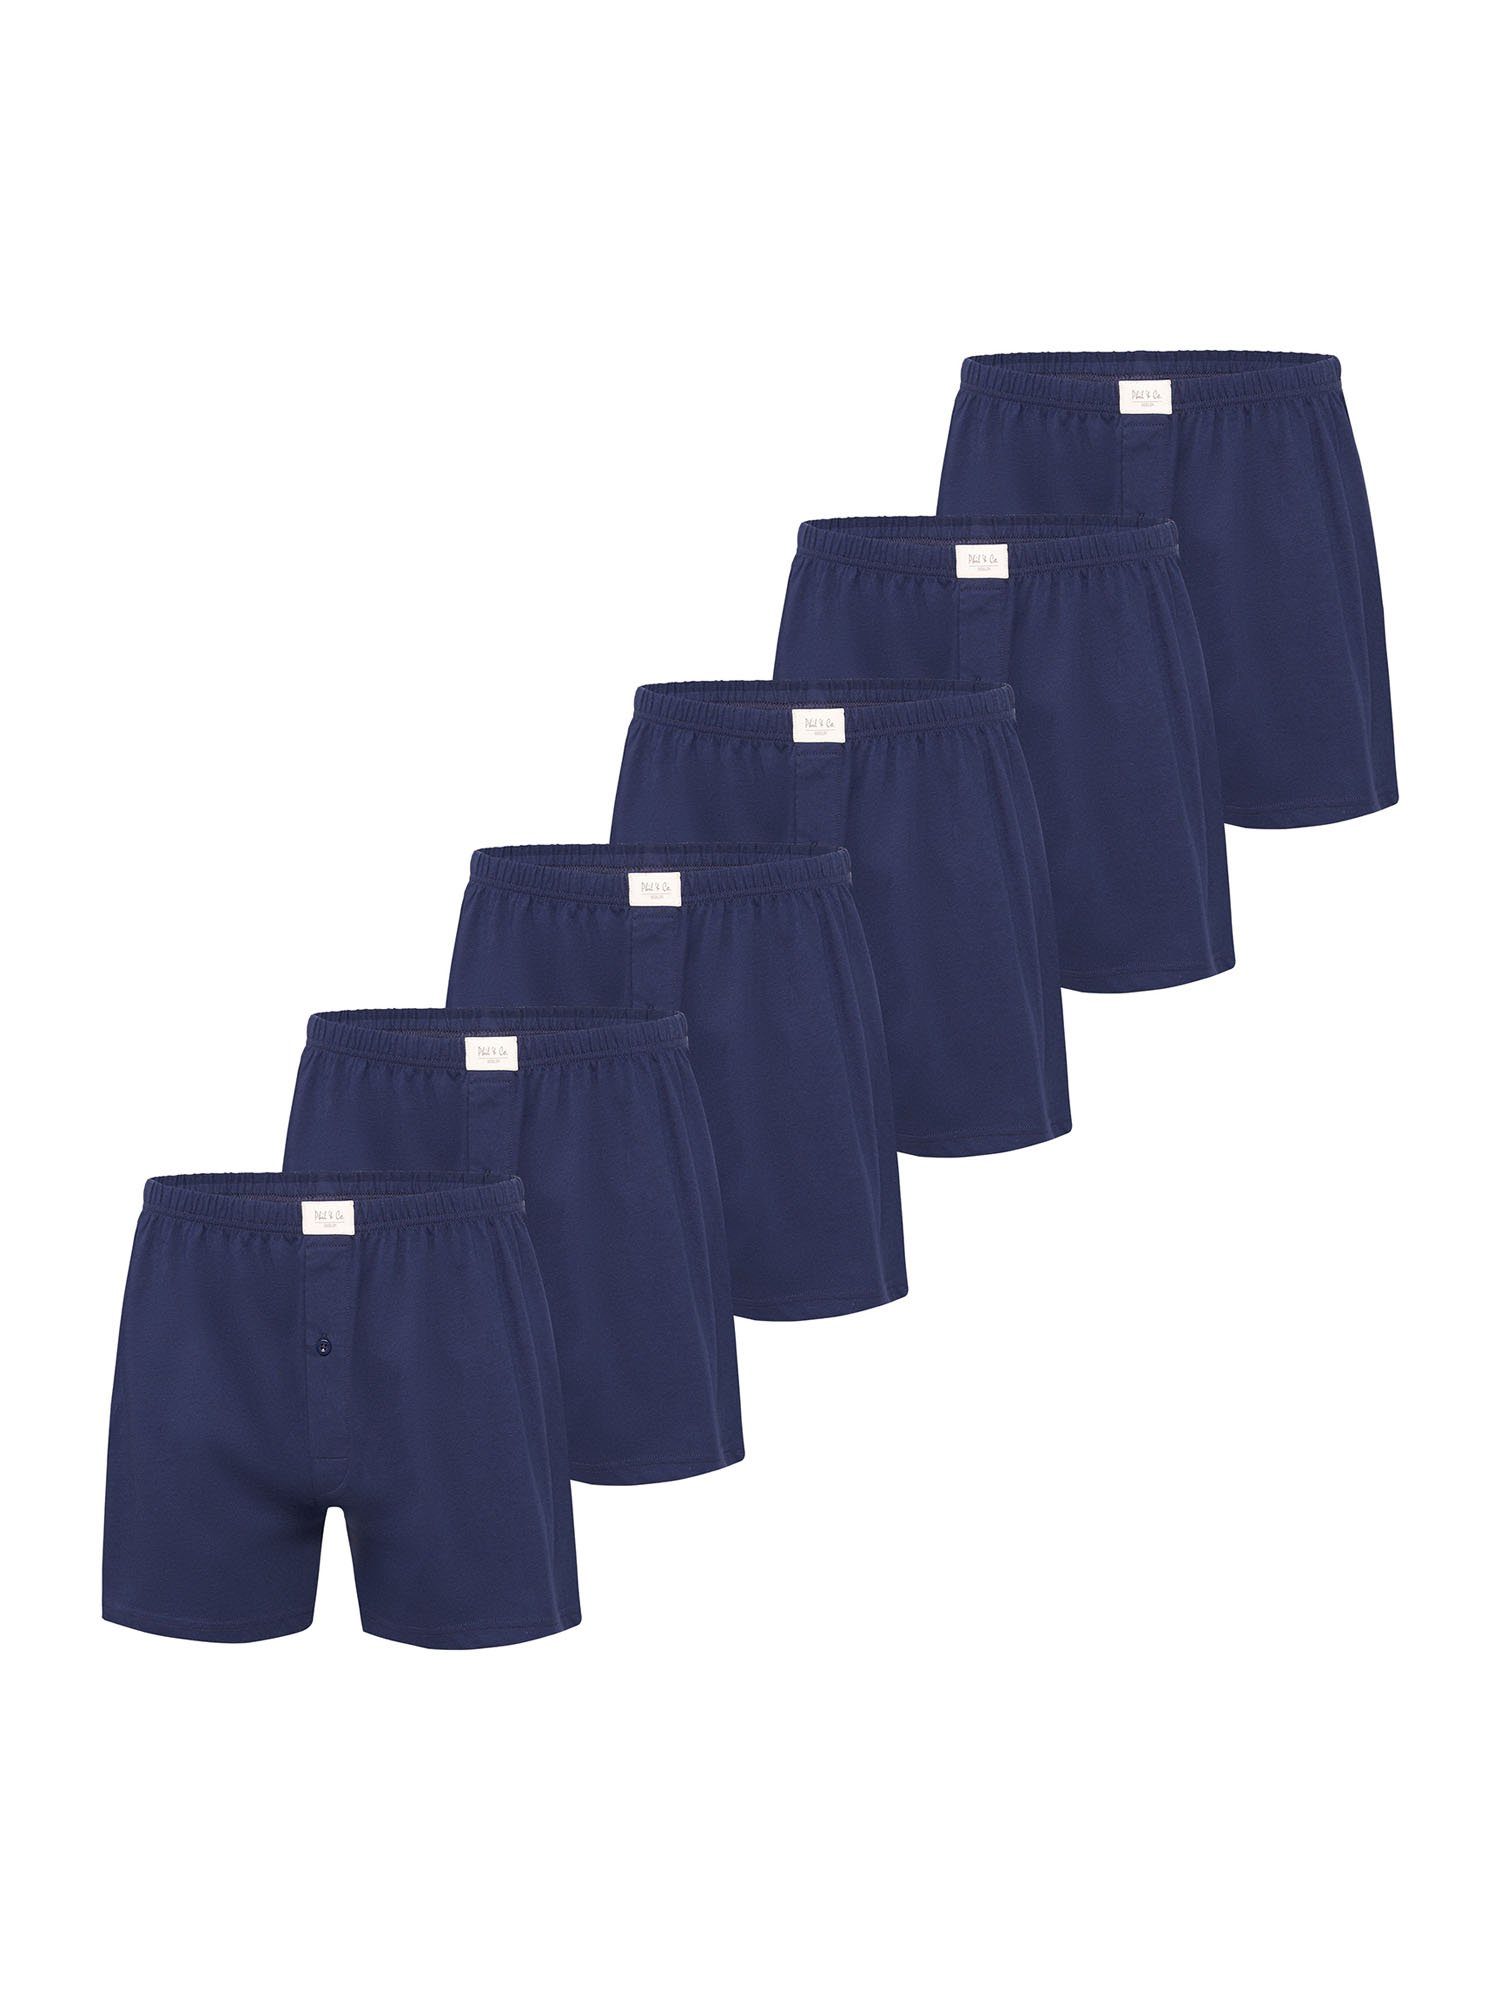 Phil & Co. Boxer Jersey navy Loose (6-St) Fit